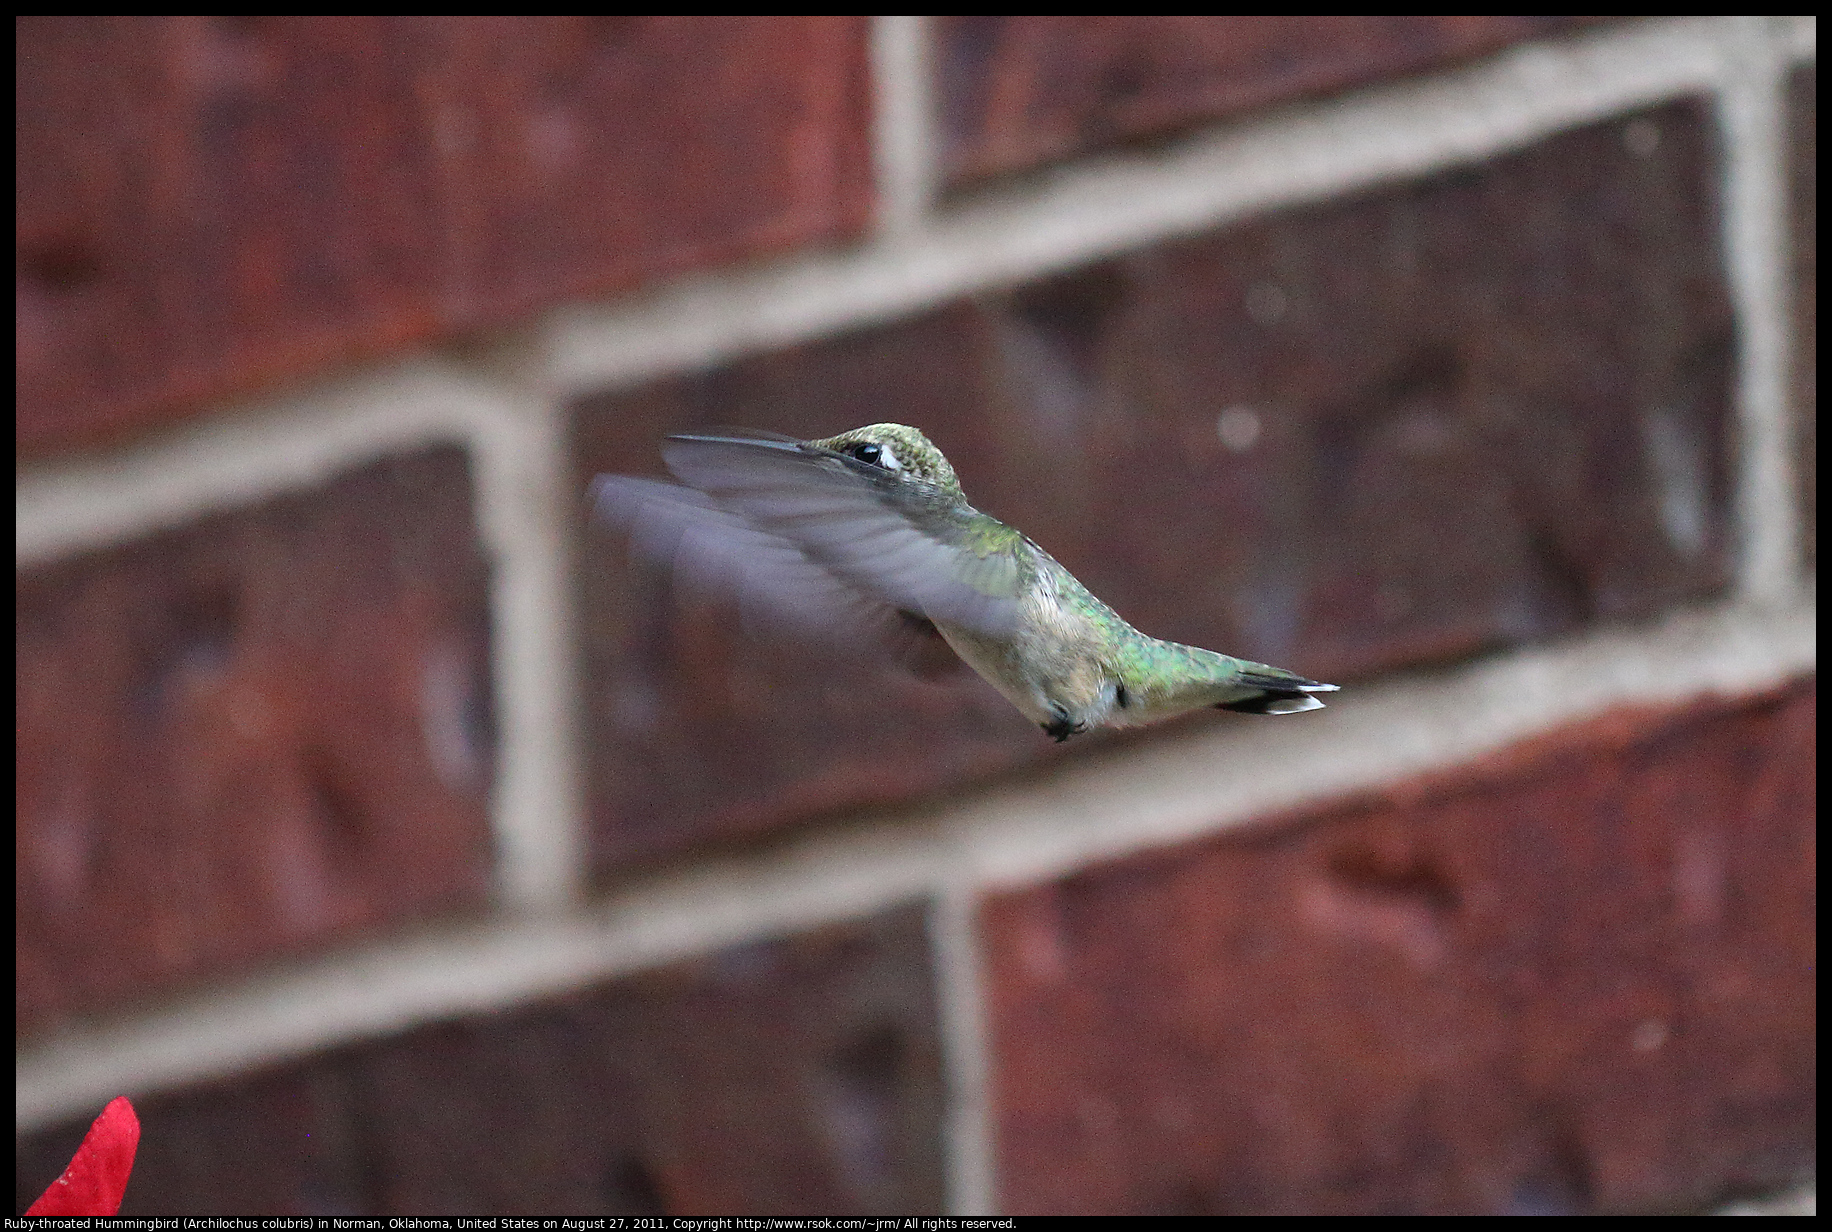 Ruby-throated Hummingbird (Archilochus colubris) in Norman, Oklahoma, United States on August 27, 2011